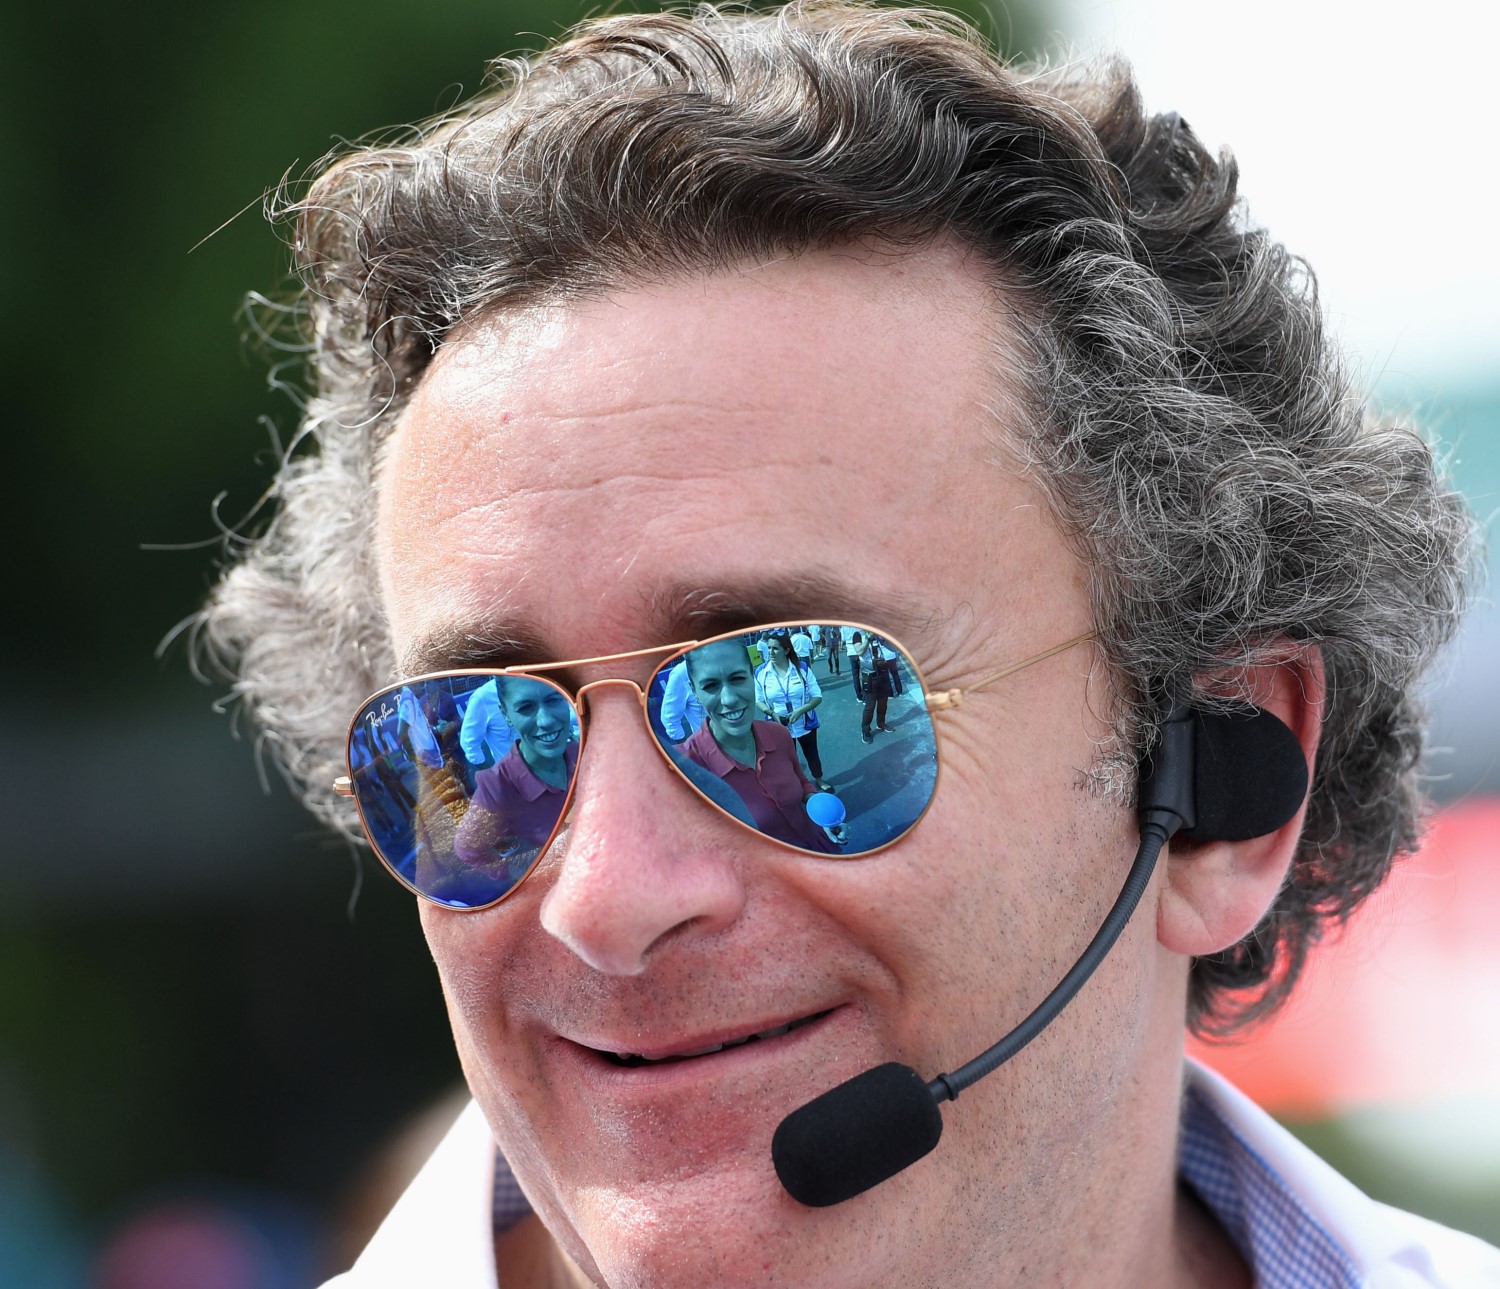 Alejandro Agag thinks his silent racing is the future.